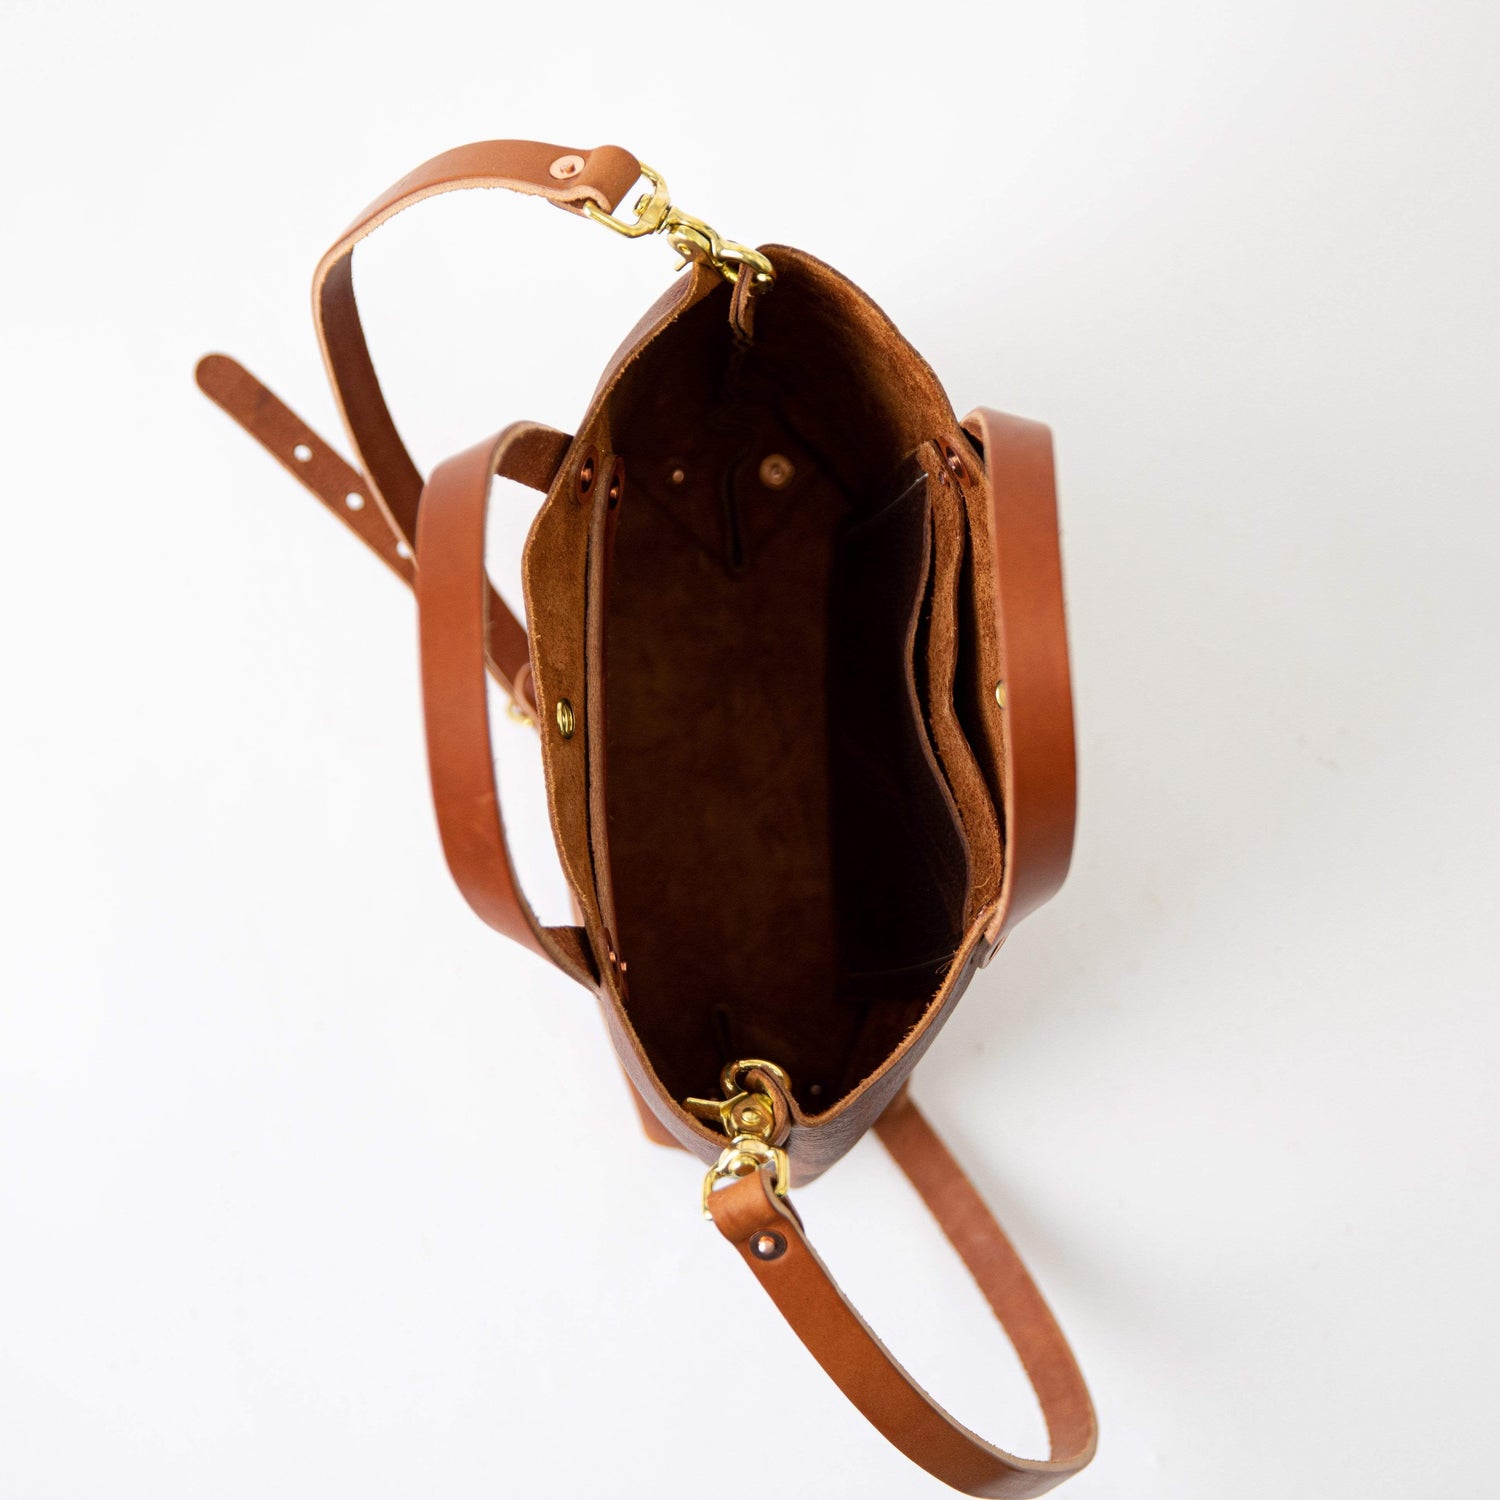 Leather Tote Bag: Brown Kodiak Mini Tote | Leather Bags by KMM & Co. Yes +$50